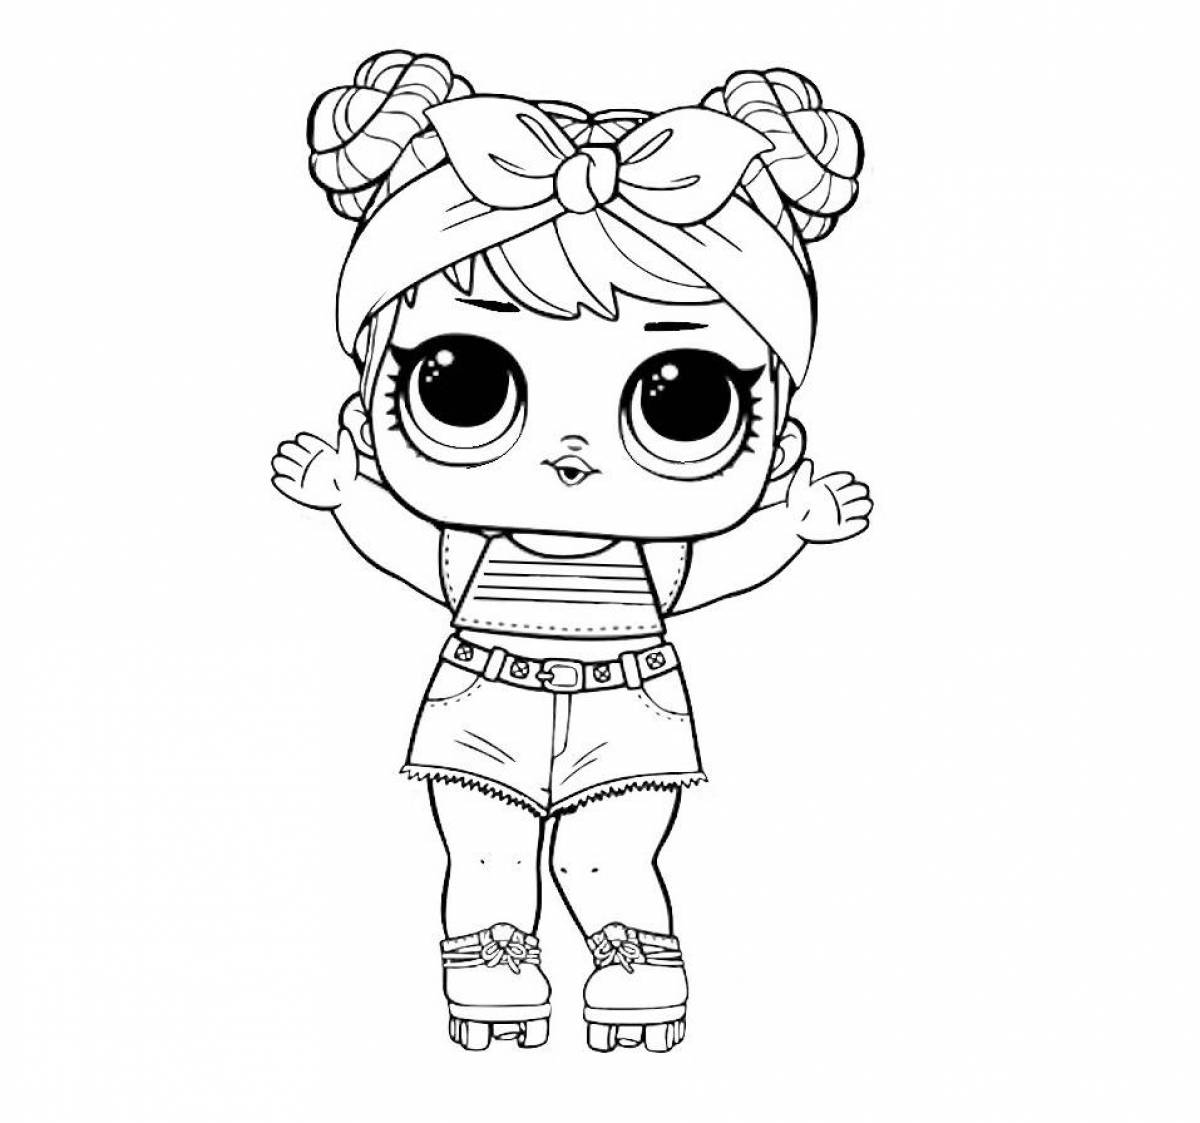 Colorful lola doll coloring page